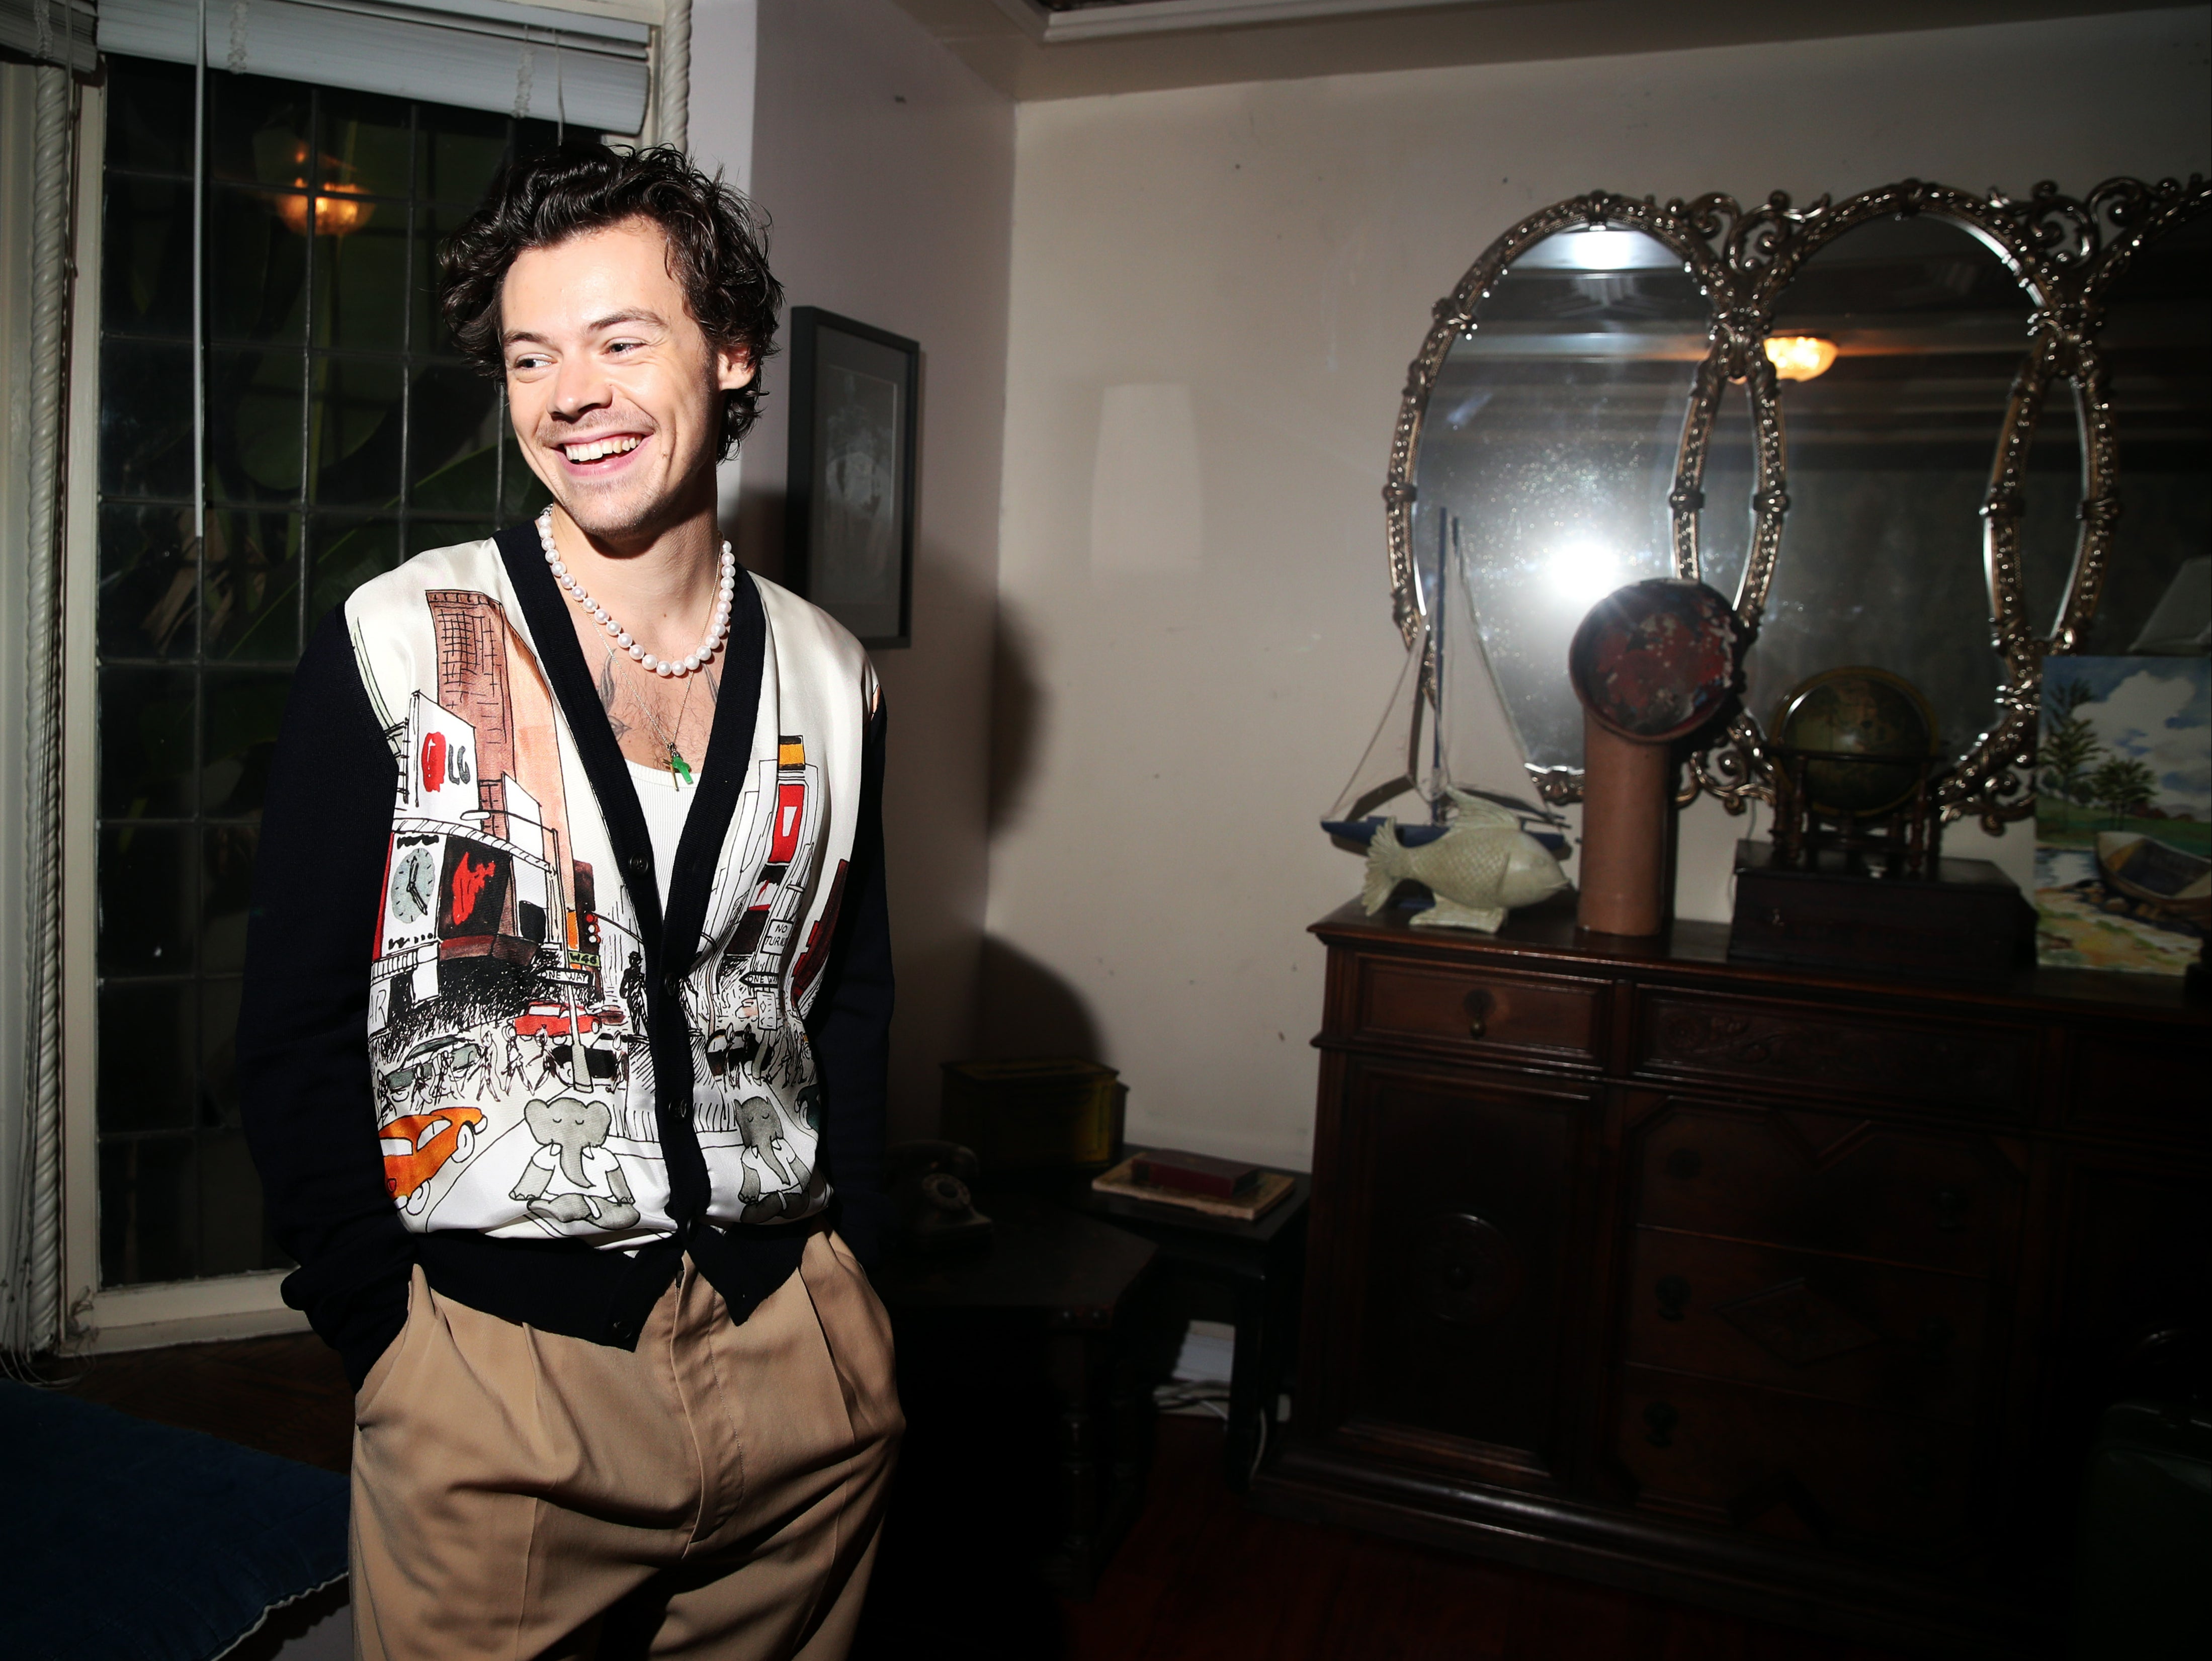 Harry Styles’s album ‘Harry’s House’ was shortlisted for the 2022 Mercury Prize